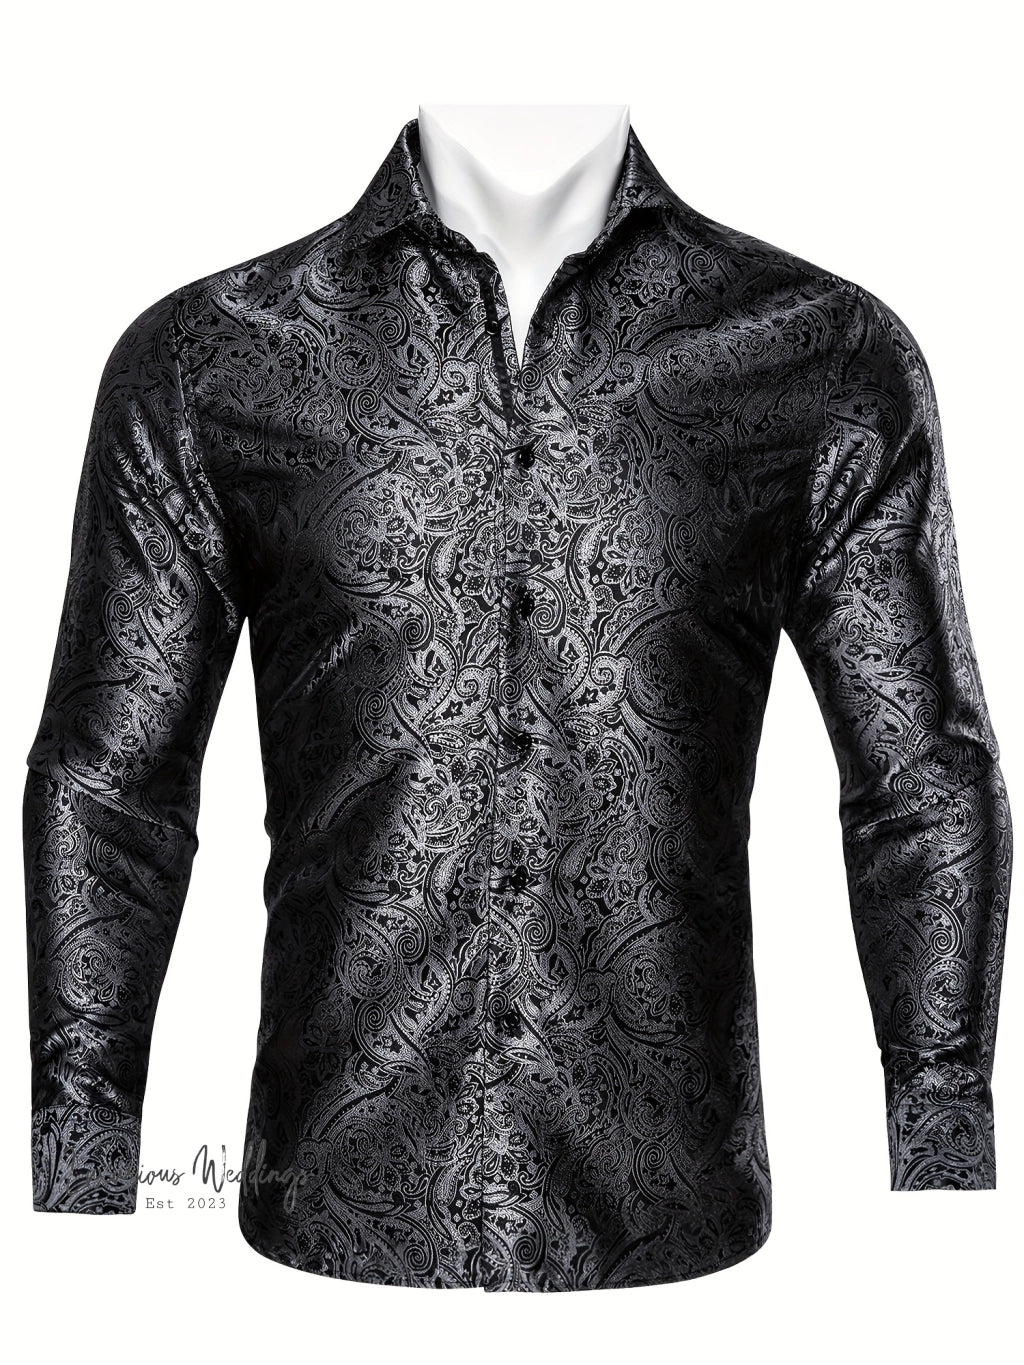 a black shirt with a paisley pattern on it